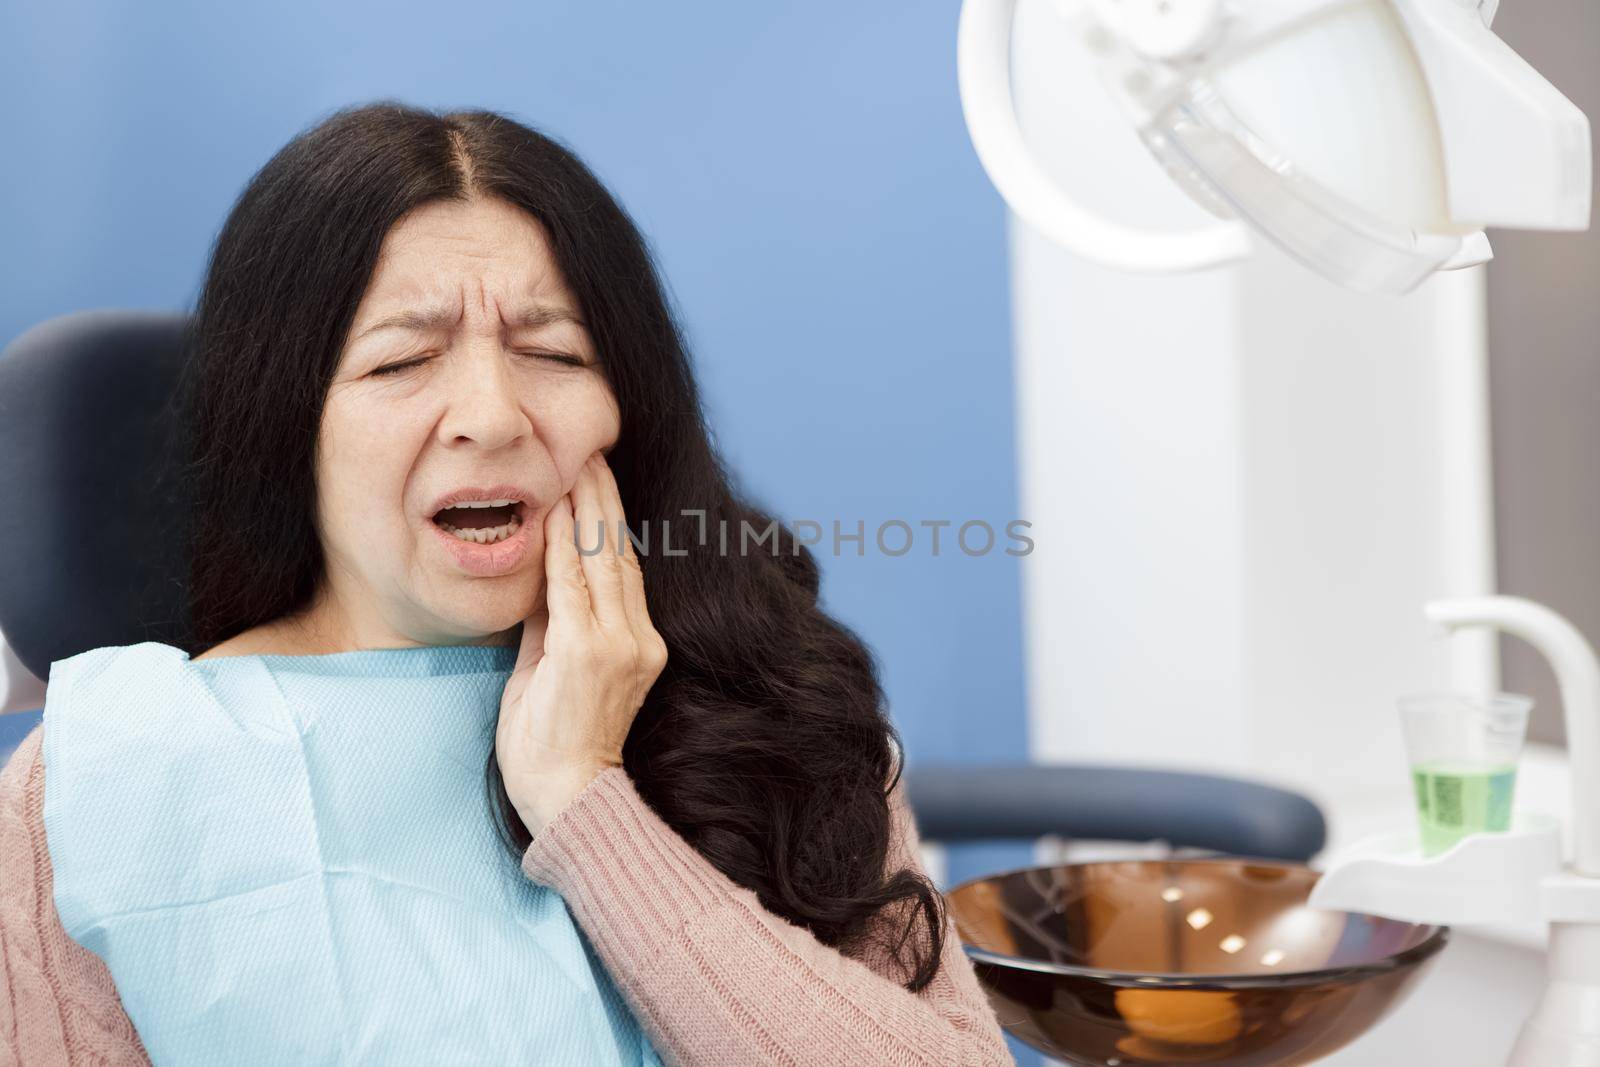 Toothache! Senior woman having a terrible toothache visiting dentist copyspace pain hurting cavities dentistry dental issues problems health suffering unhealthy aging elderly patient help concept